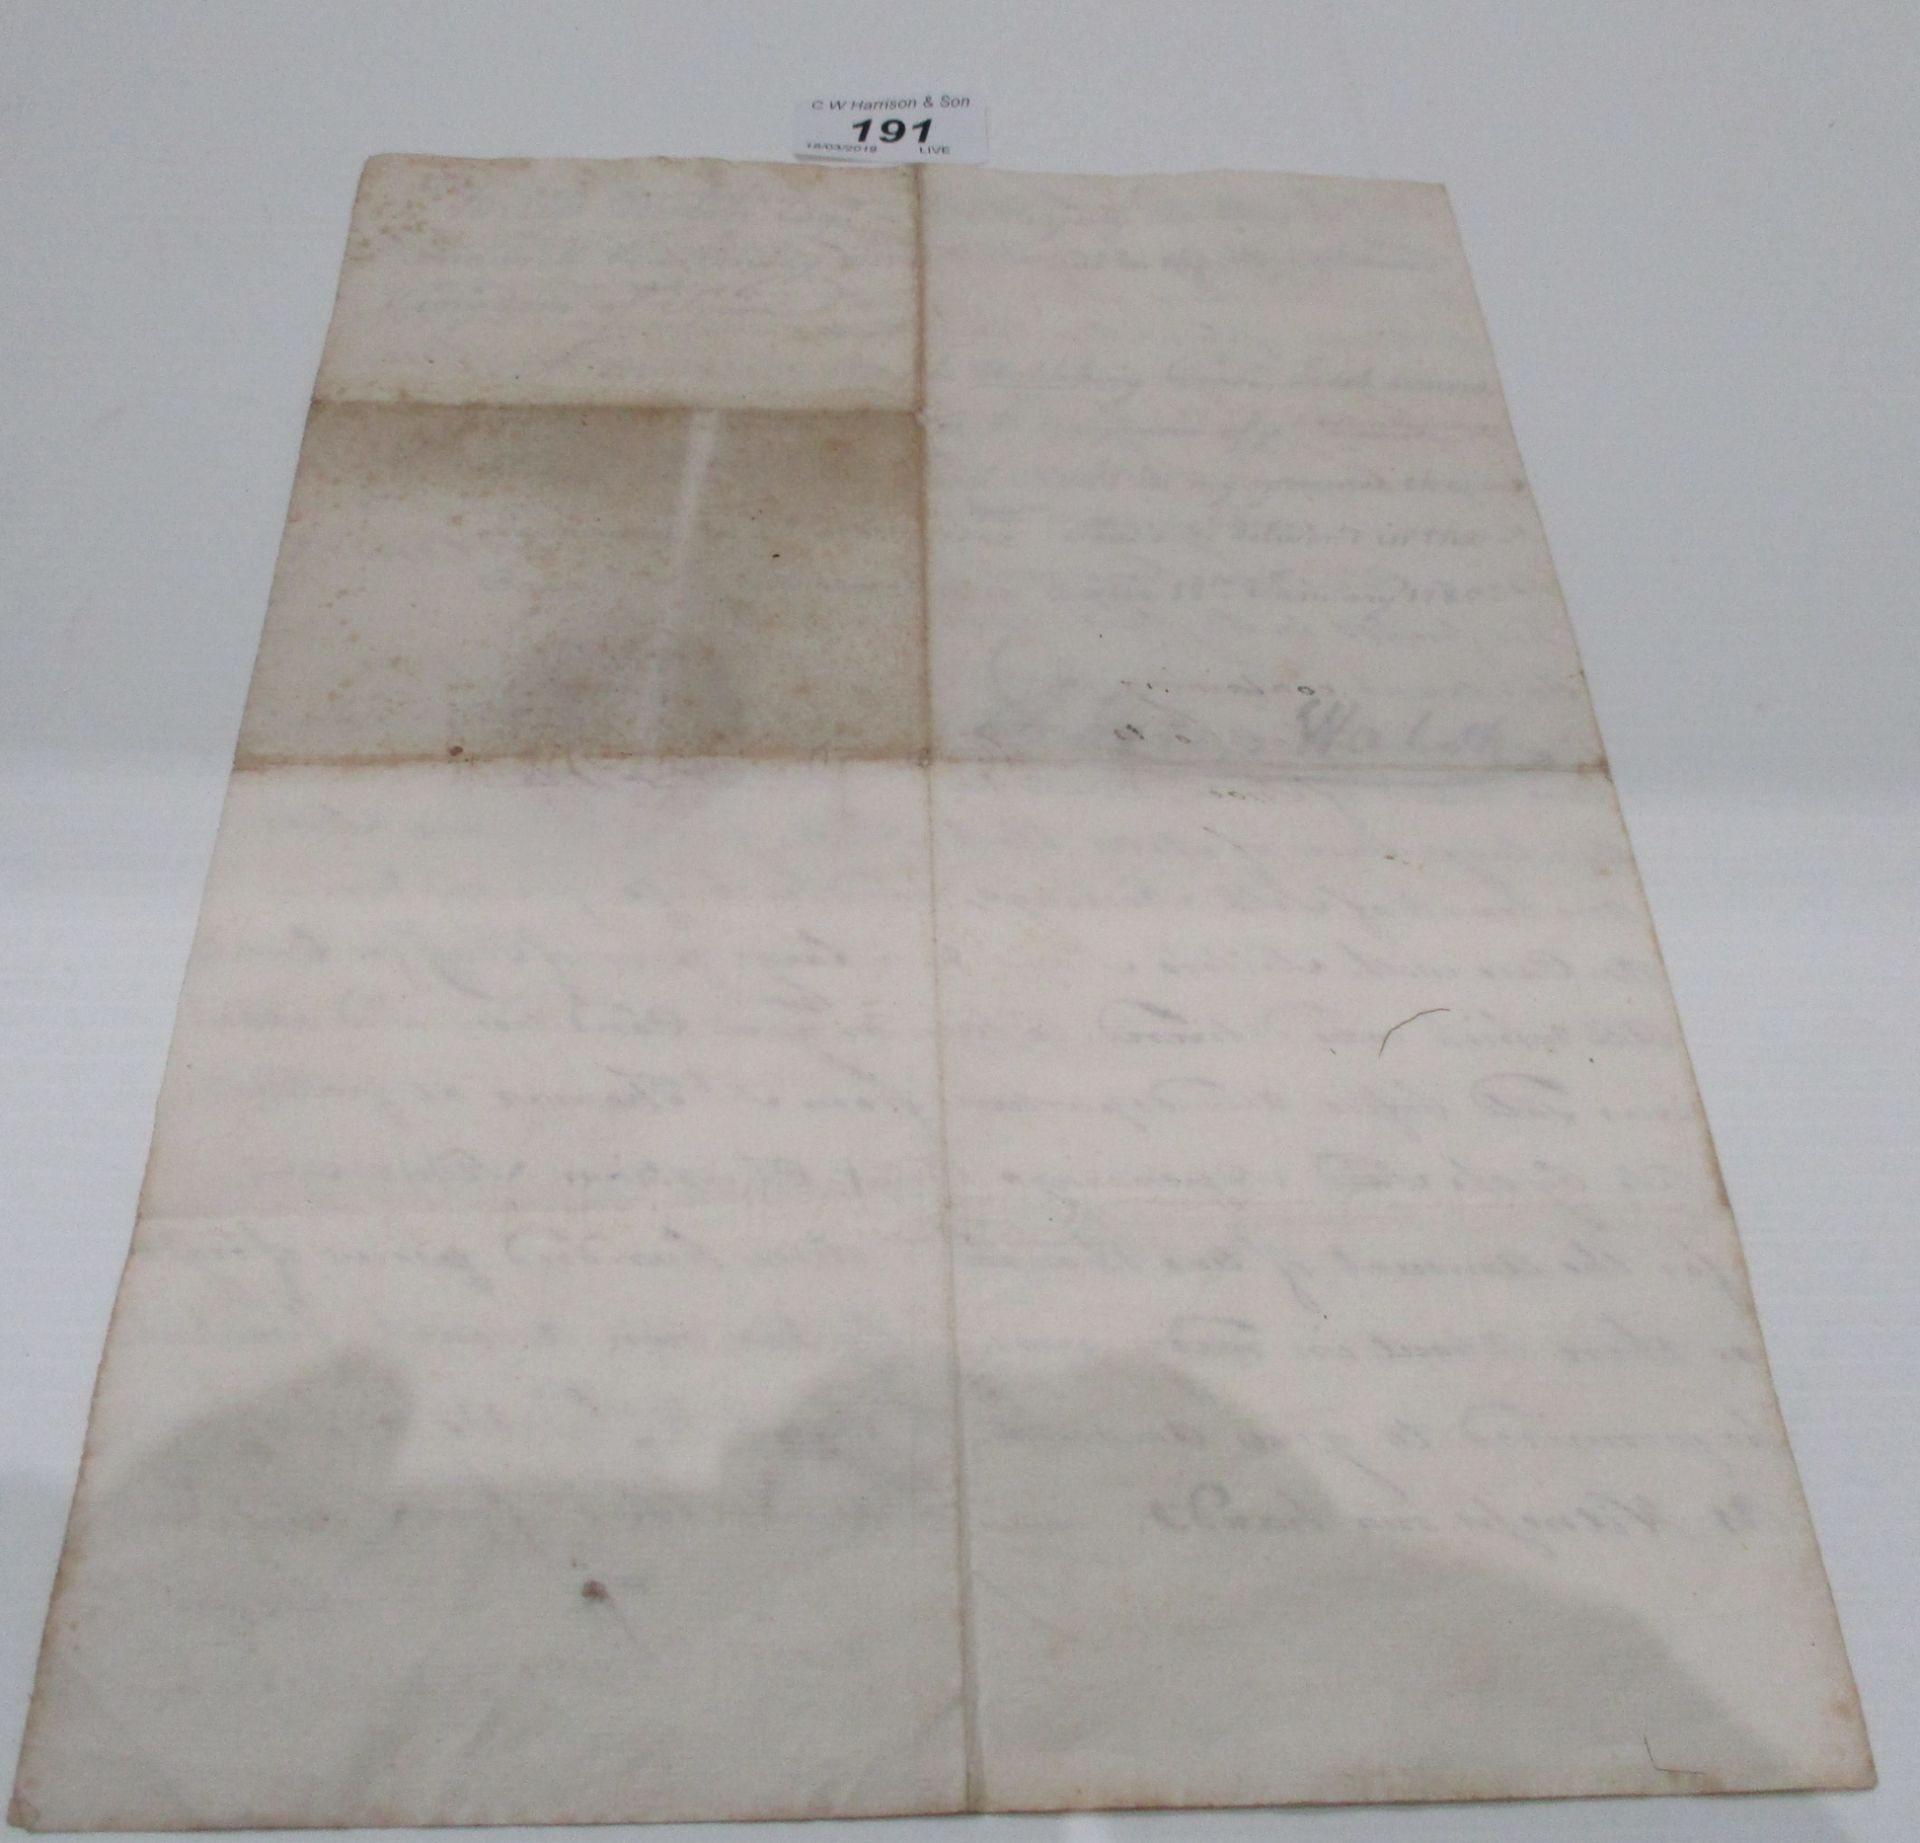 An interesting and intriguing Affidavit written aboard ship in 1785 concerning the affairs of it's - Image 3 of 6